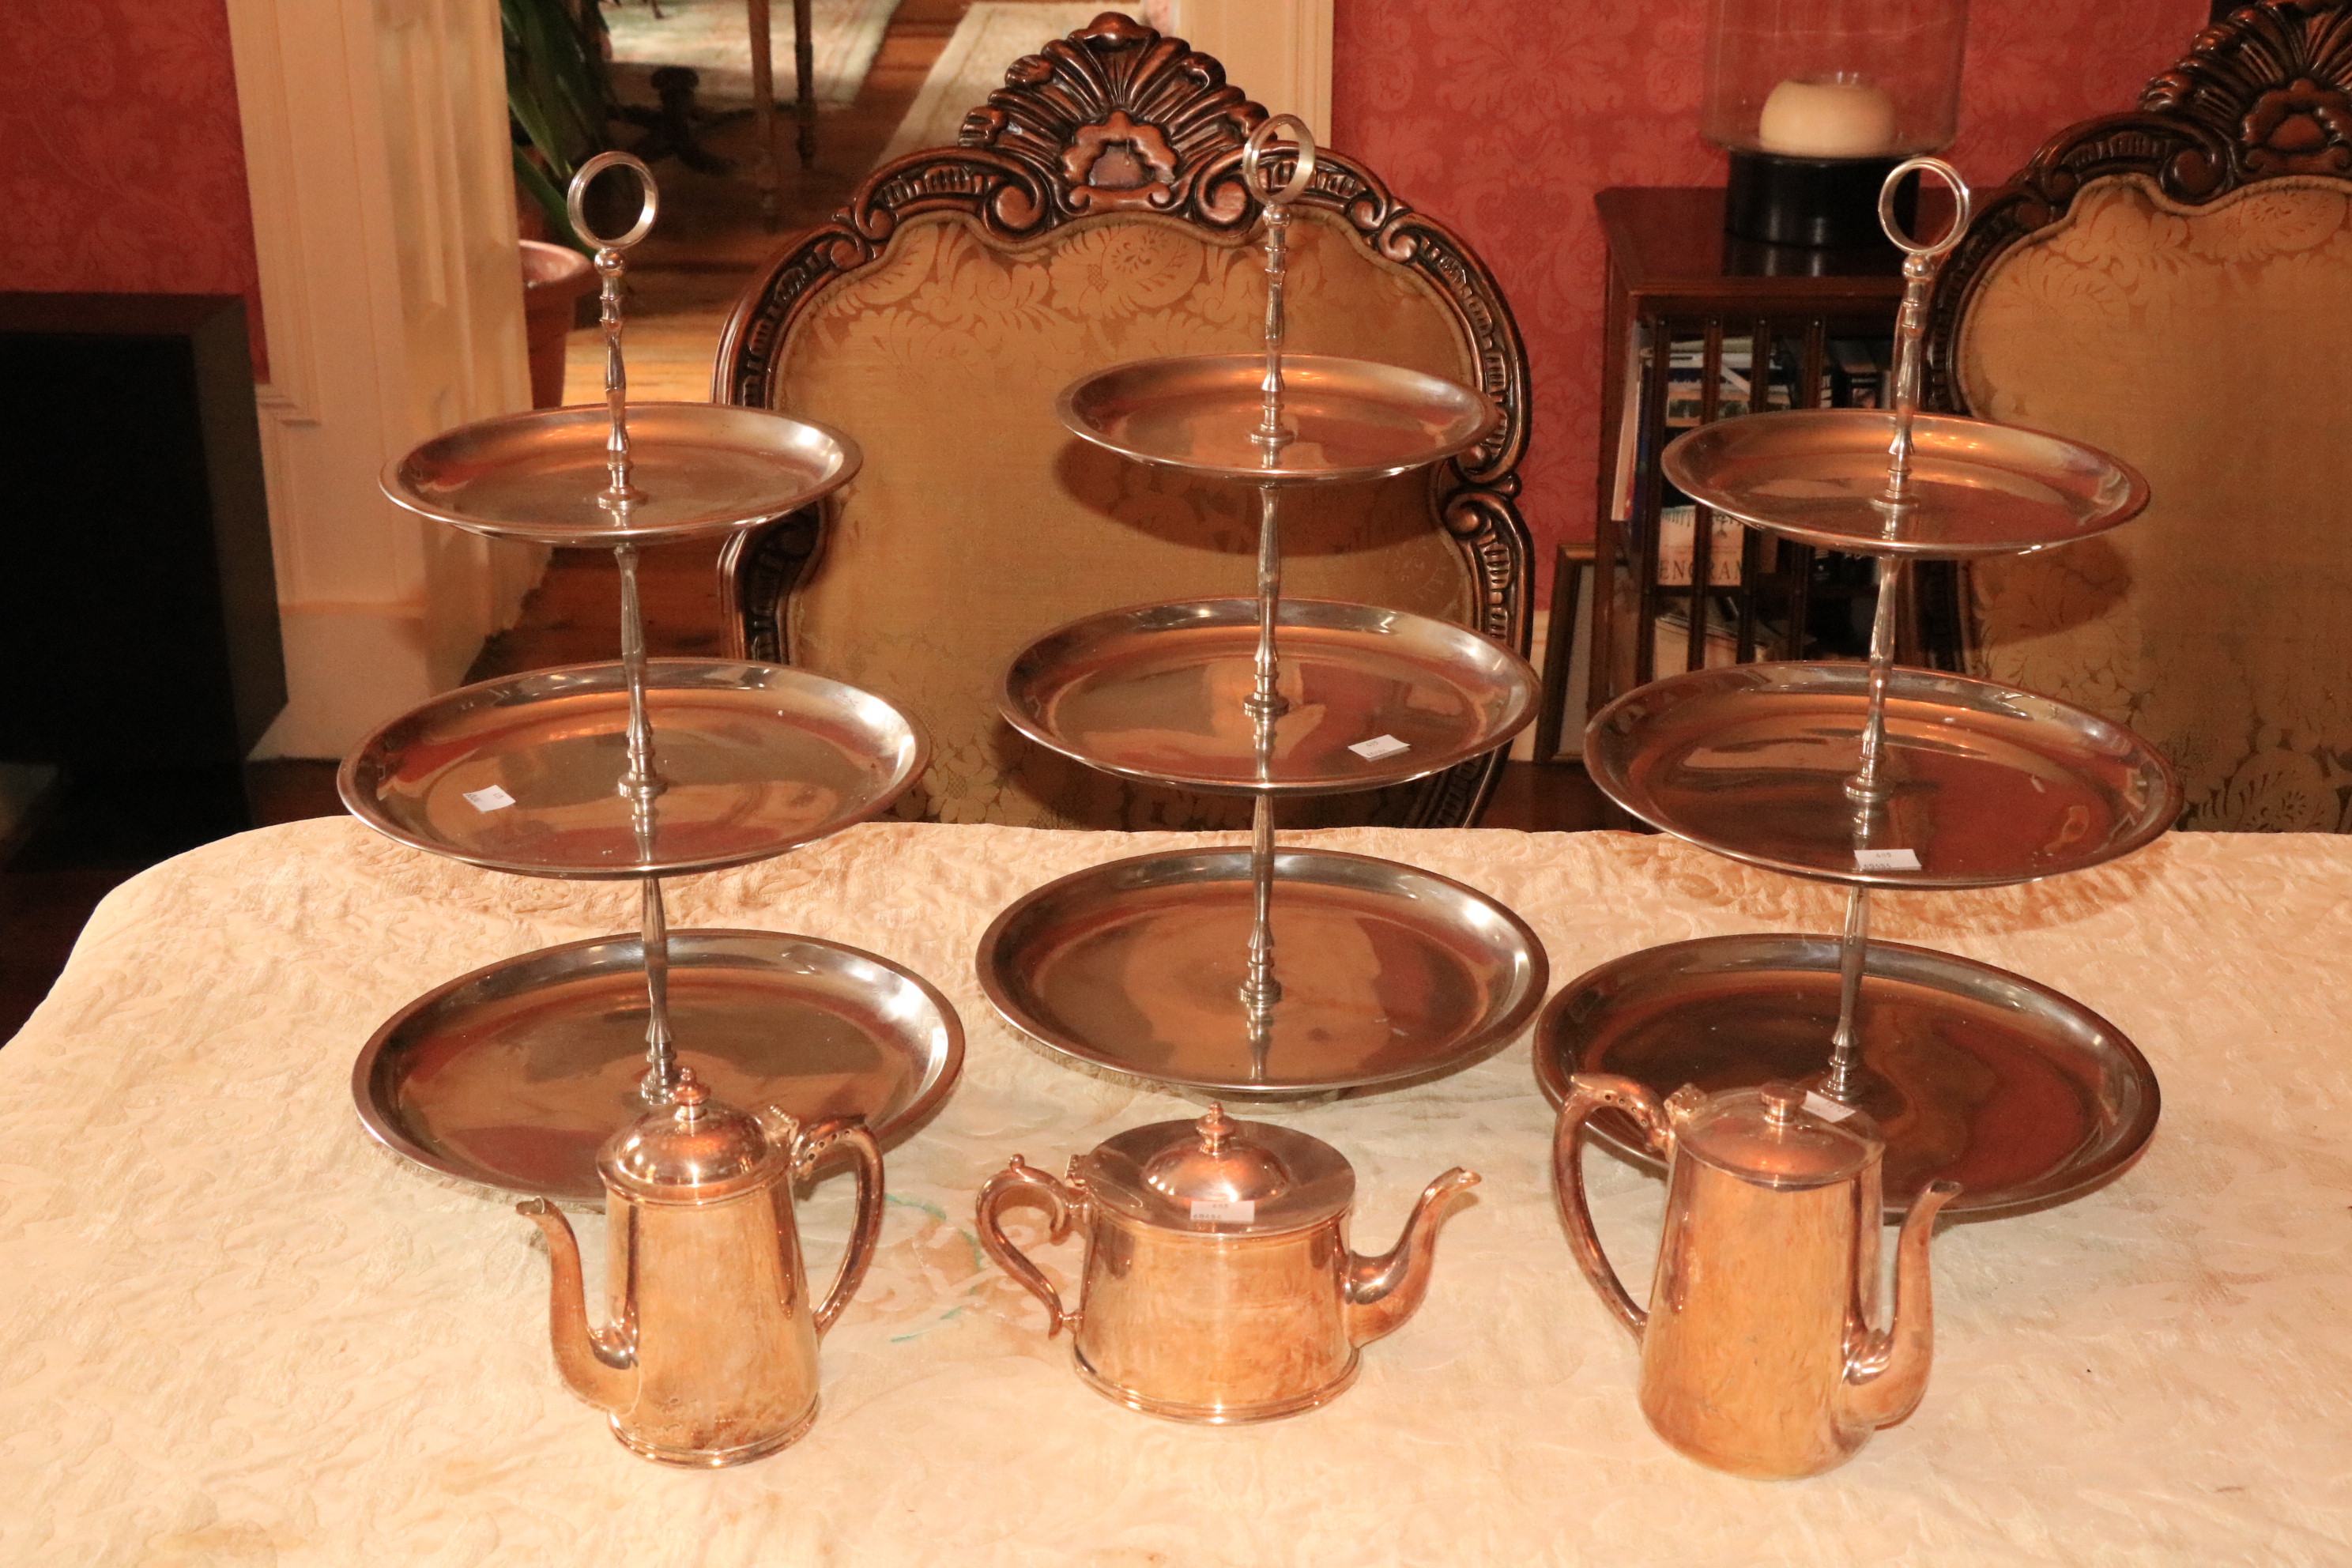 A set of 3 - three tier circular Afternoon Tea, Sandwich and Cake Stands, with ring handles, a